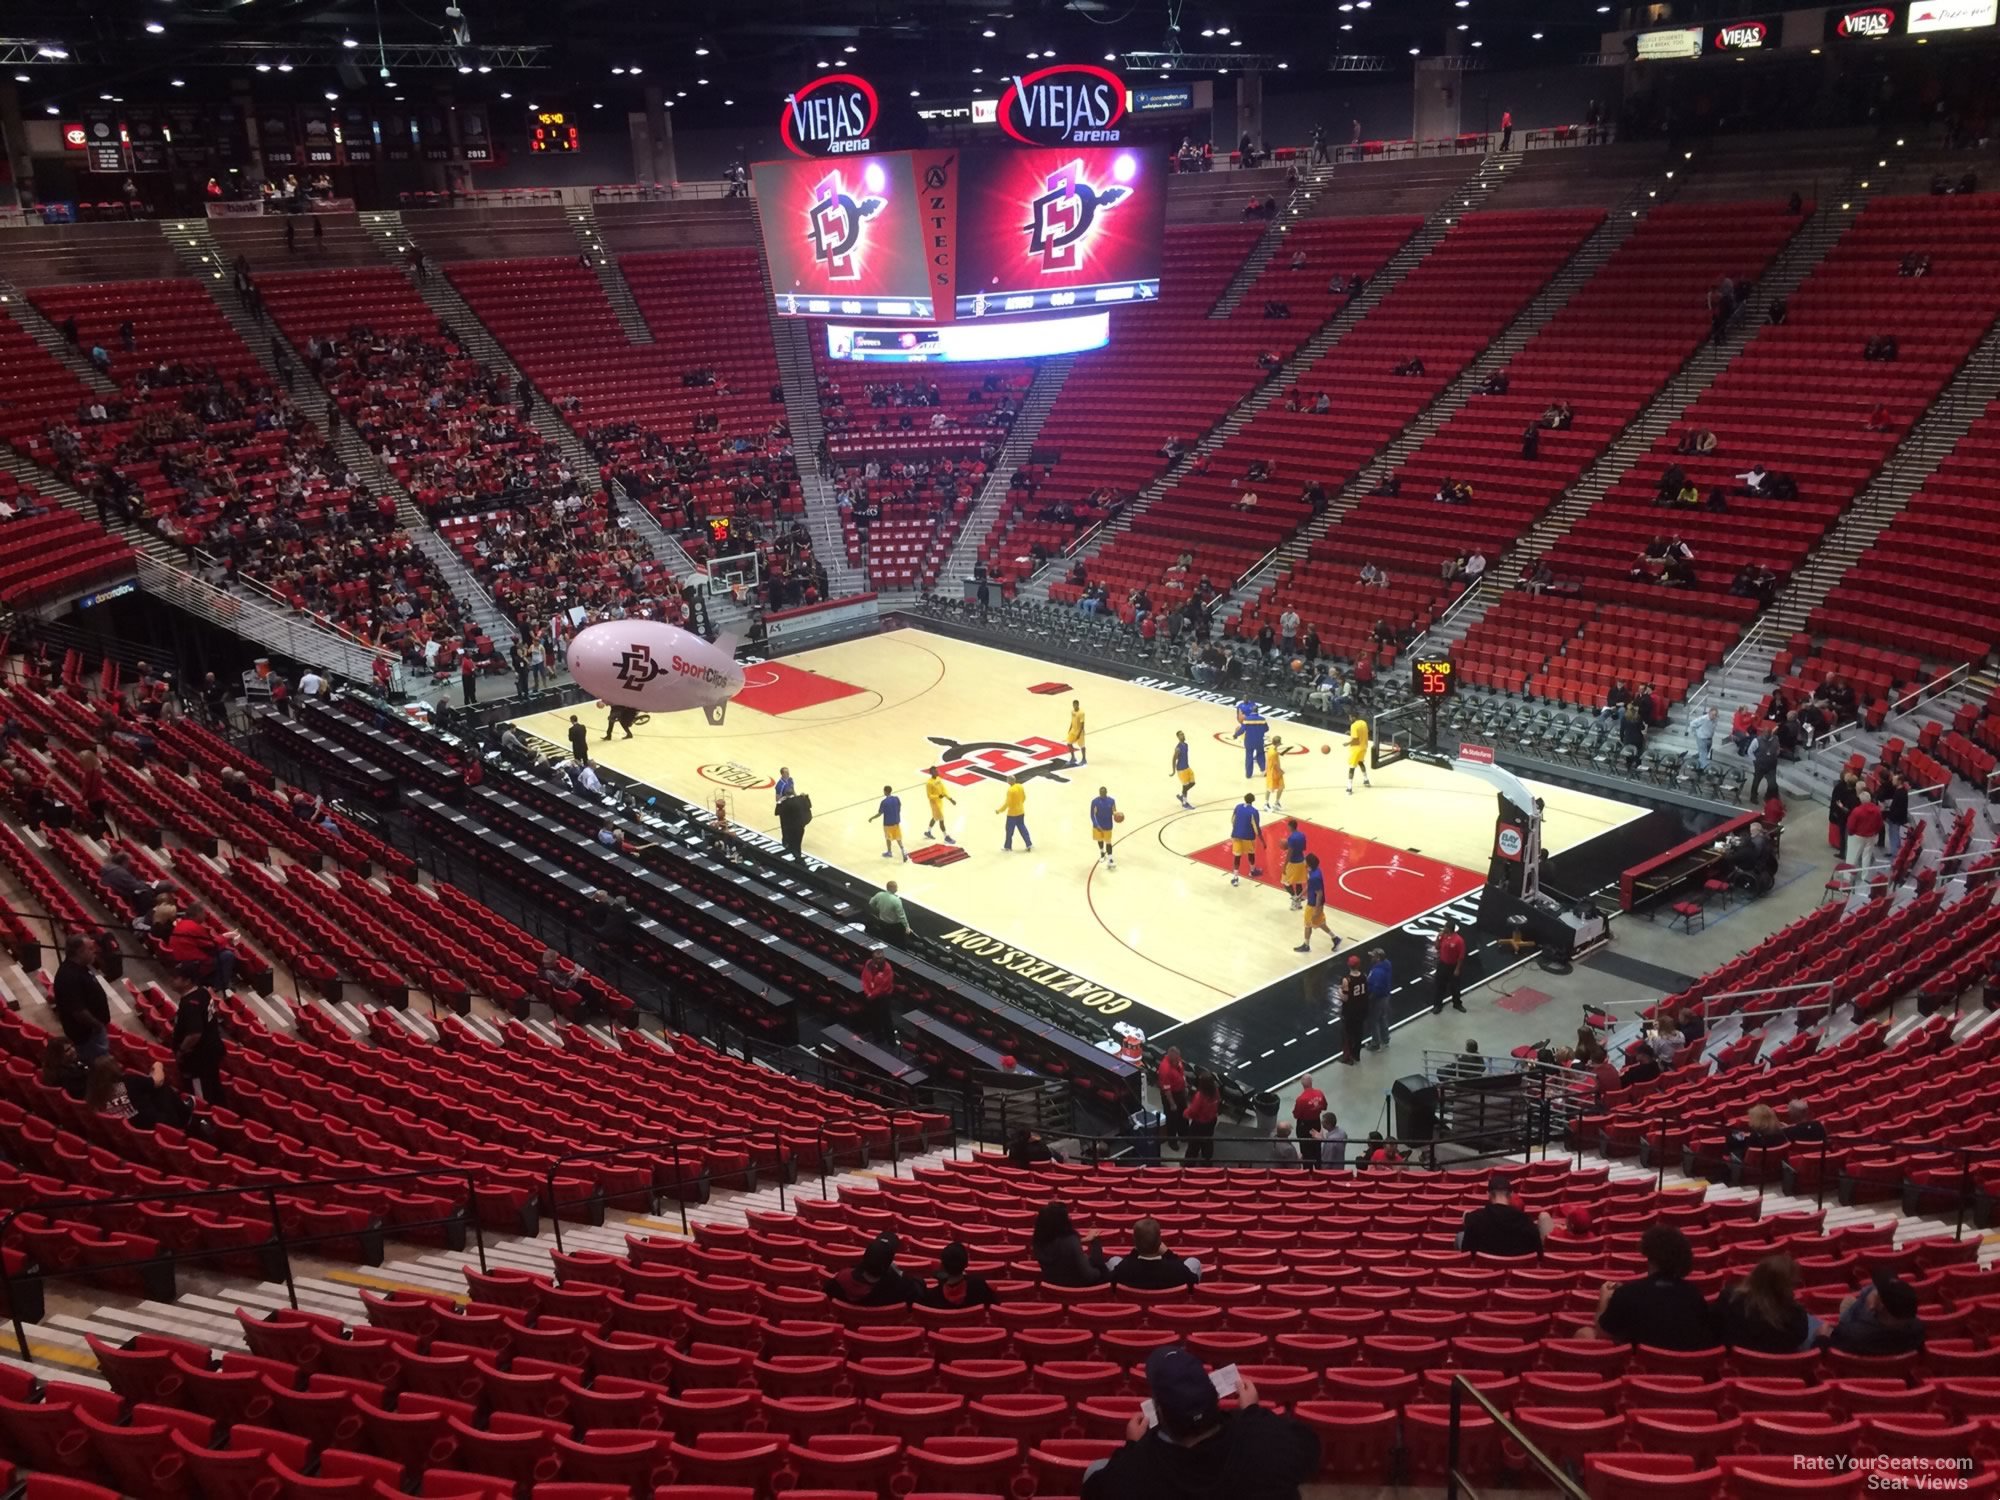 Section U at Viejas Arena 